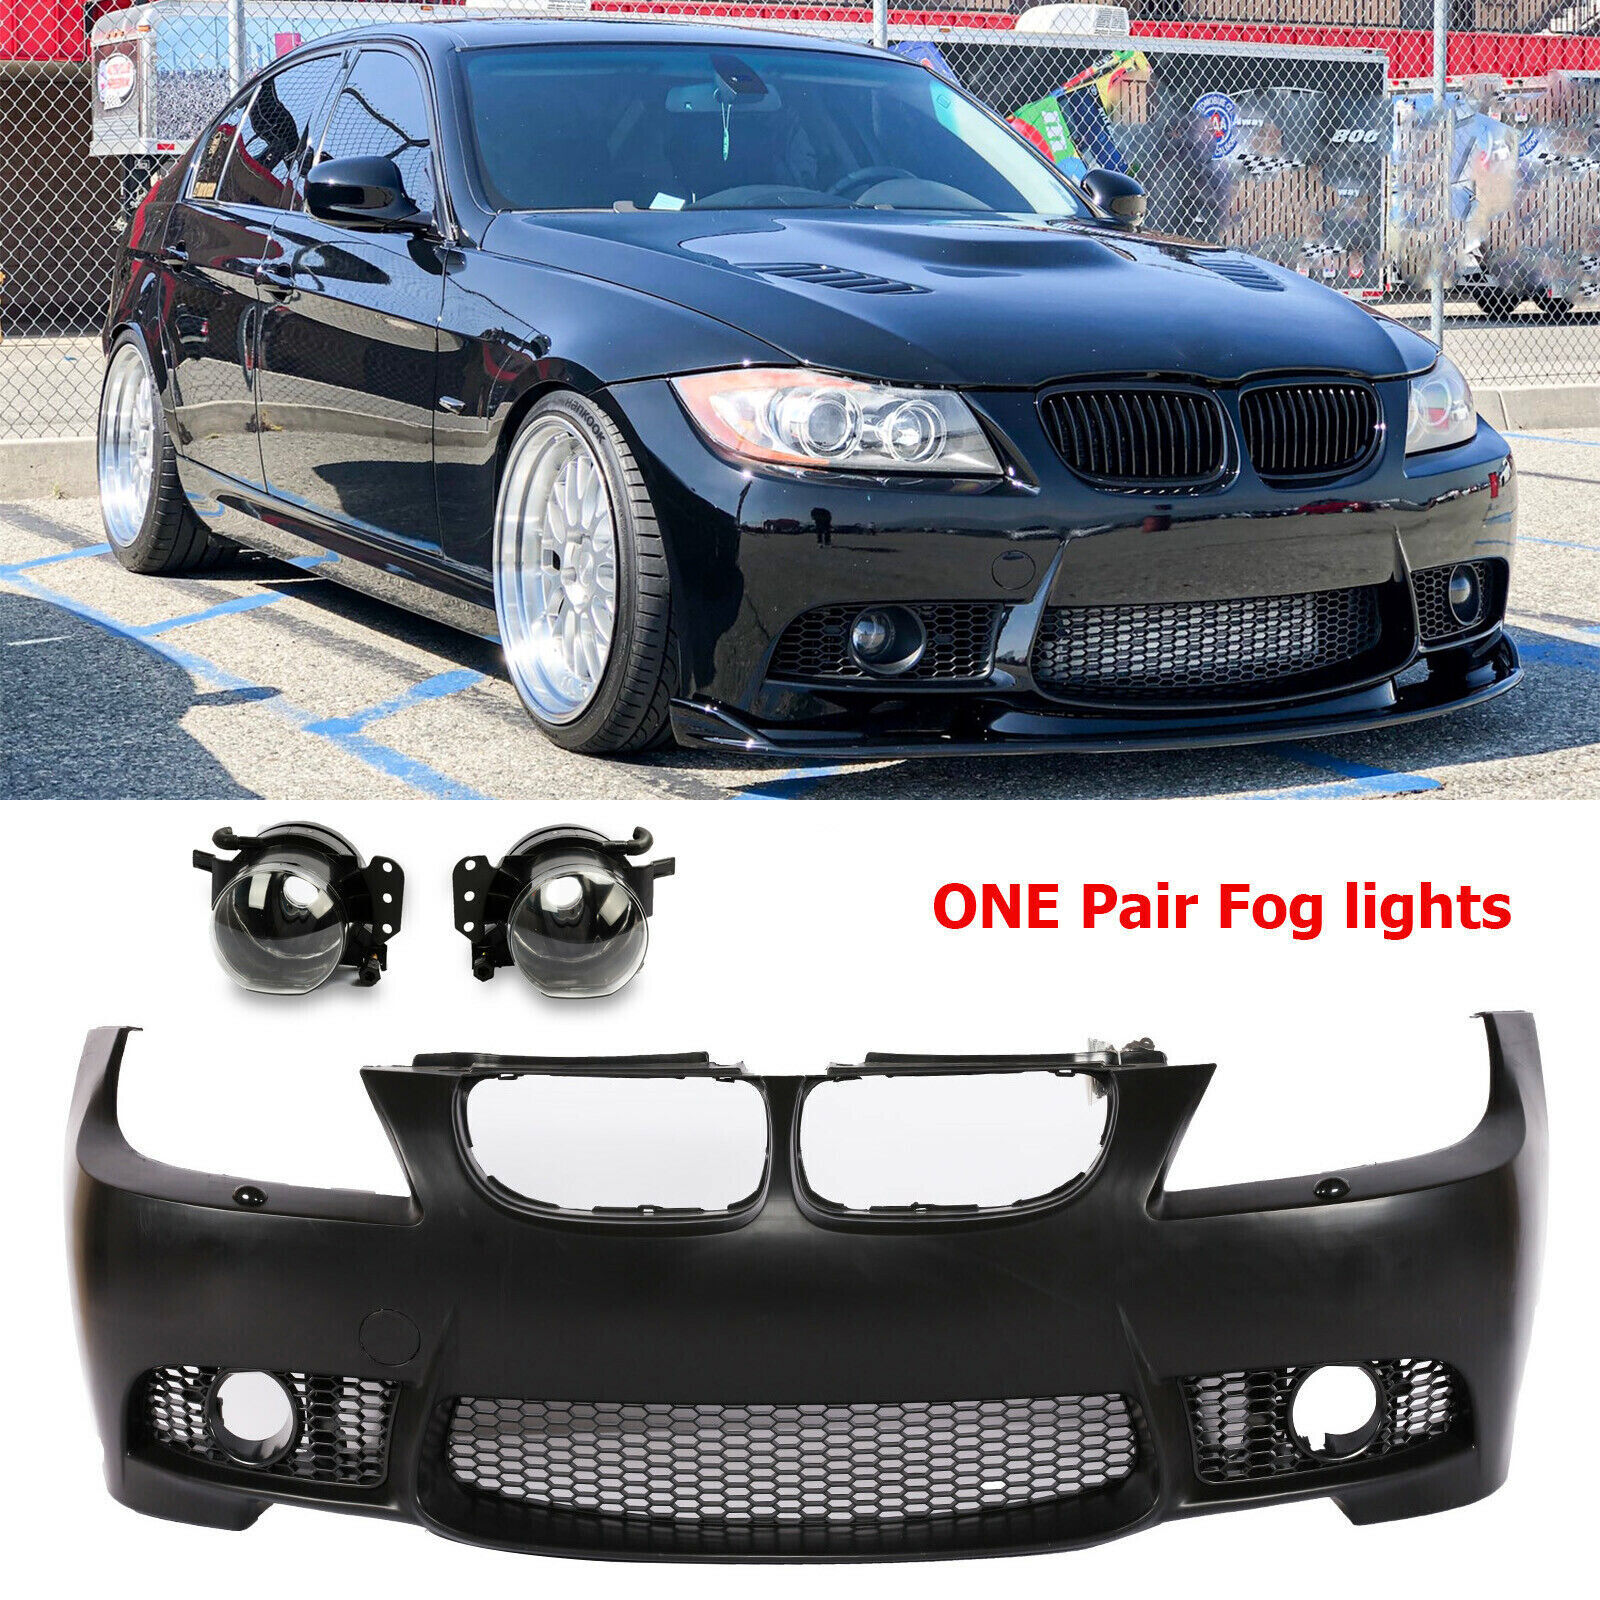 FOR 2009-2011 BMW E90 3 SERIES FRONT BUMPER M3 LOOK W/ Fog ligths